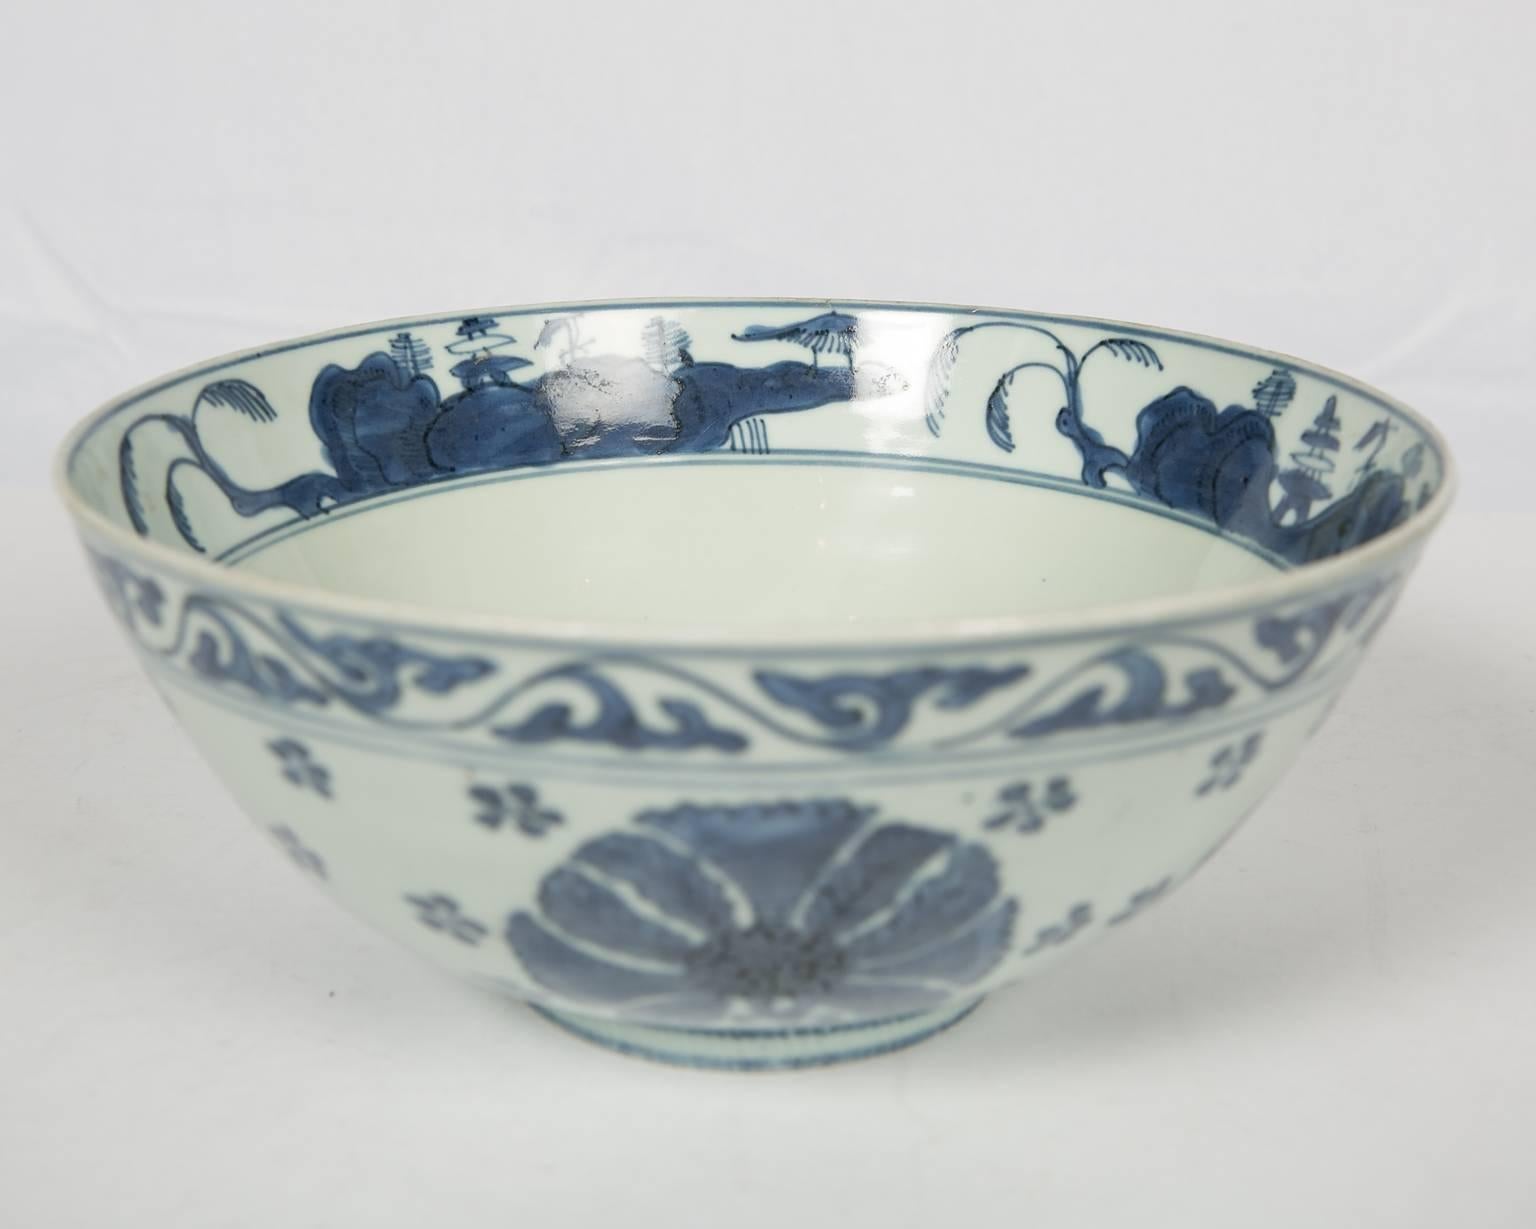 We are pleased to offer this delicate Chinese blue and white porcelain bowl, made during the Daoguong reign, between 1820-1850. The bowl is hand-painted in the traditional, elegant Ming style. The outside of the bowl is decorated with large flower